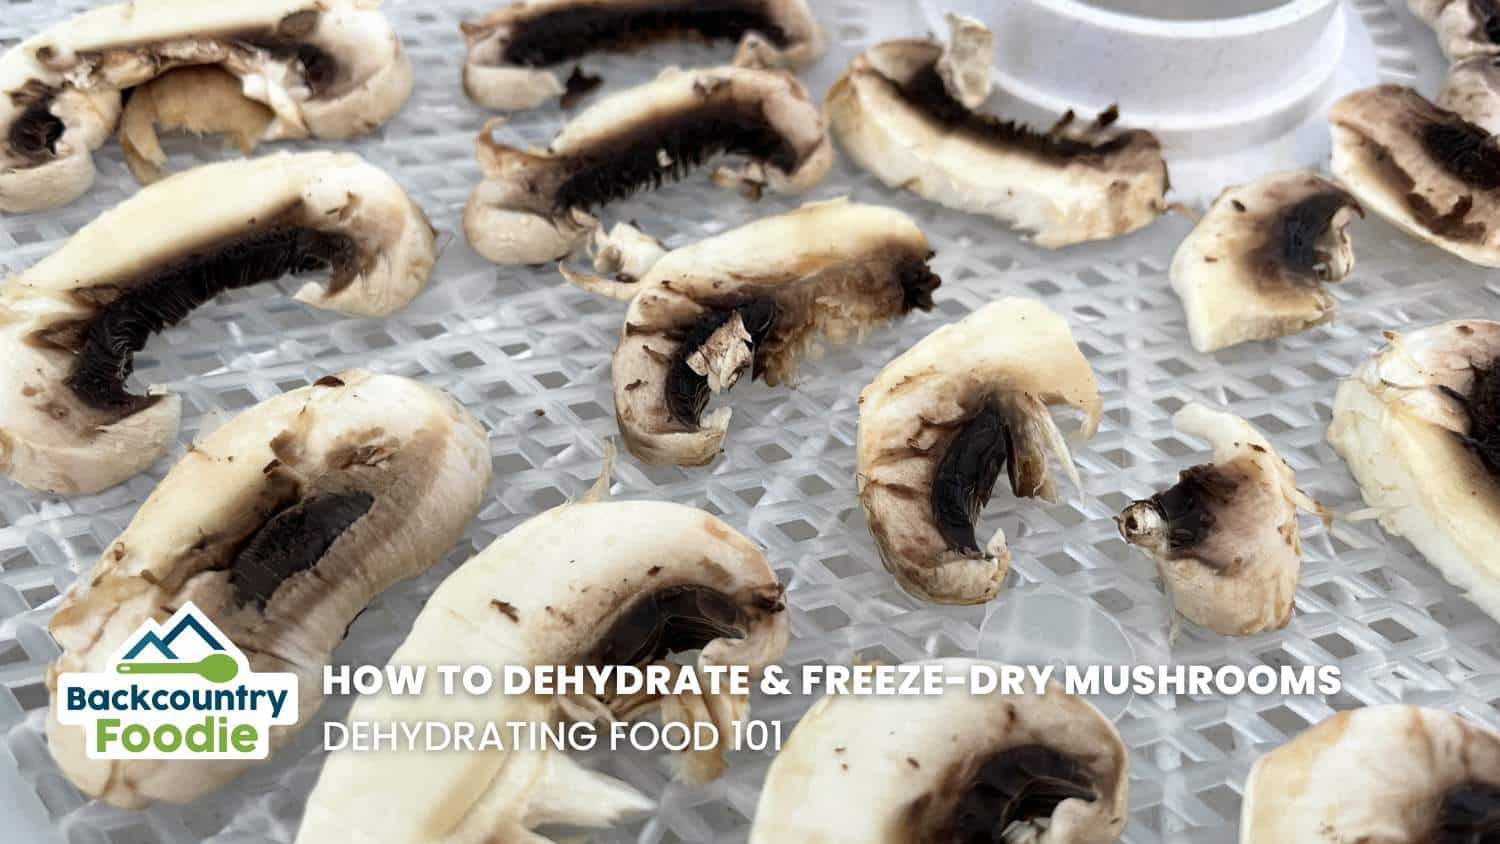 Backcountry Foodie how to dehydrate mushrooms blog thumbnail image